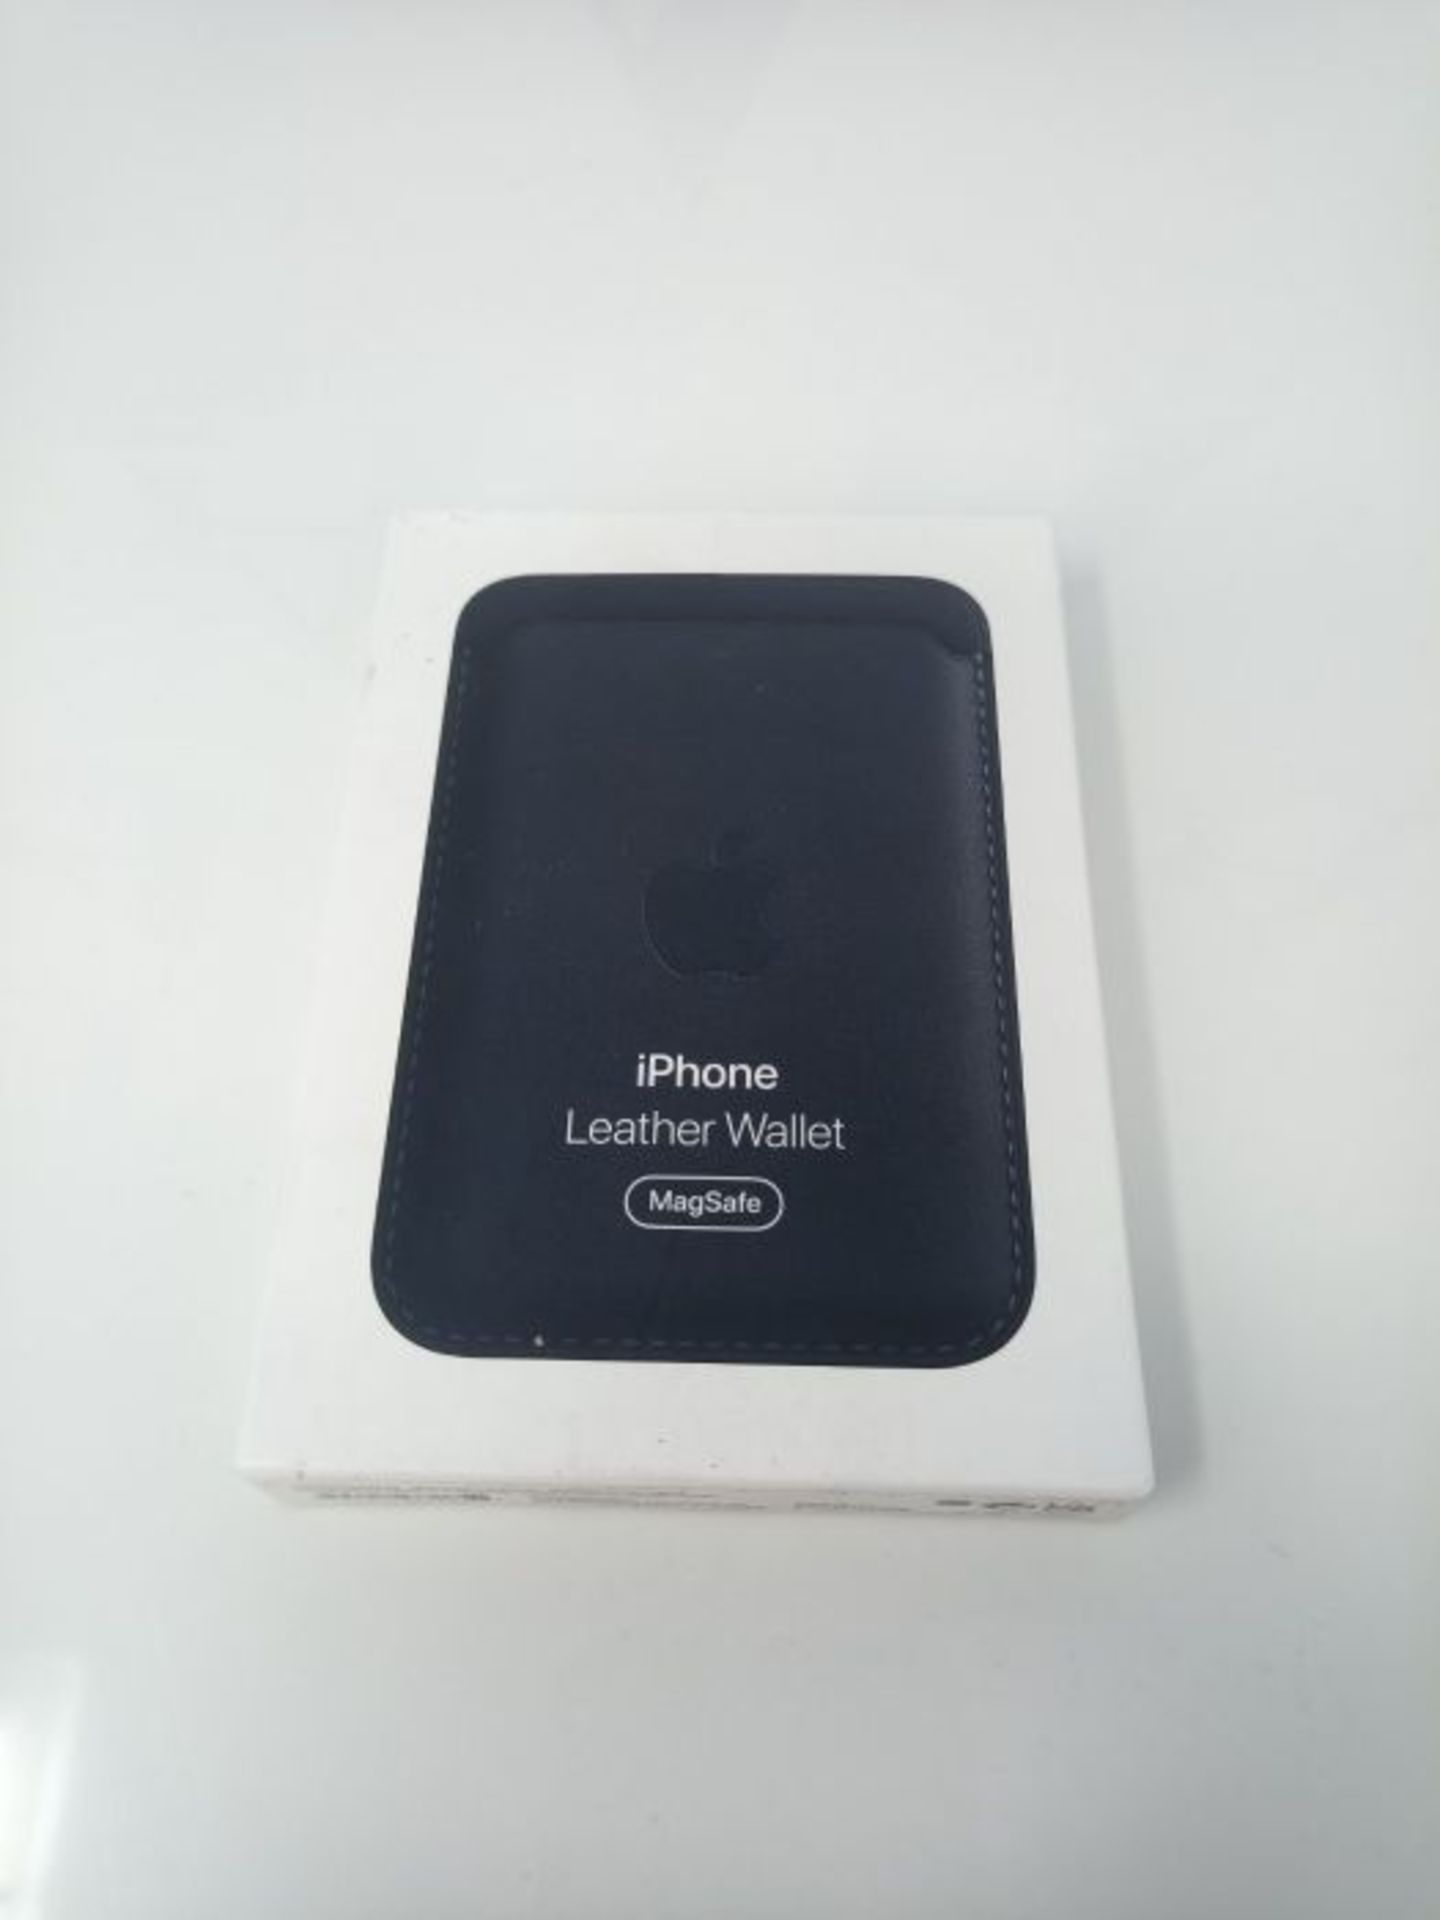 Apple Leather Wallet with MagSafe (for iPhone) - Midnight - Image 2 of 3